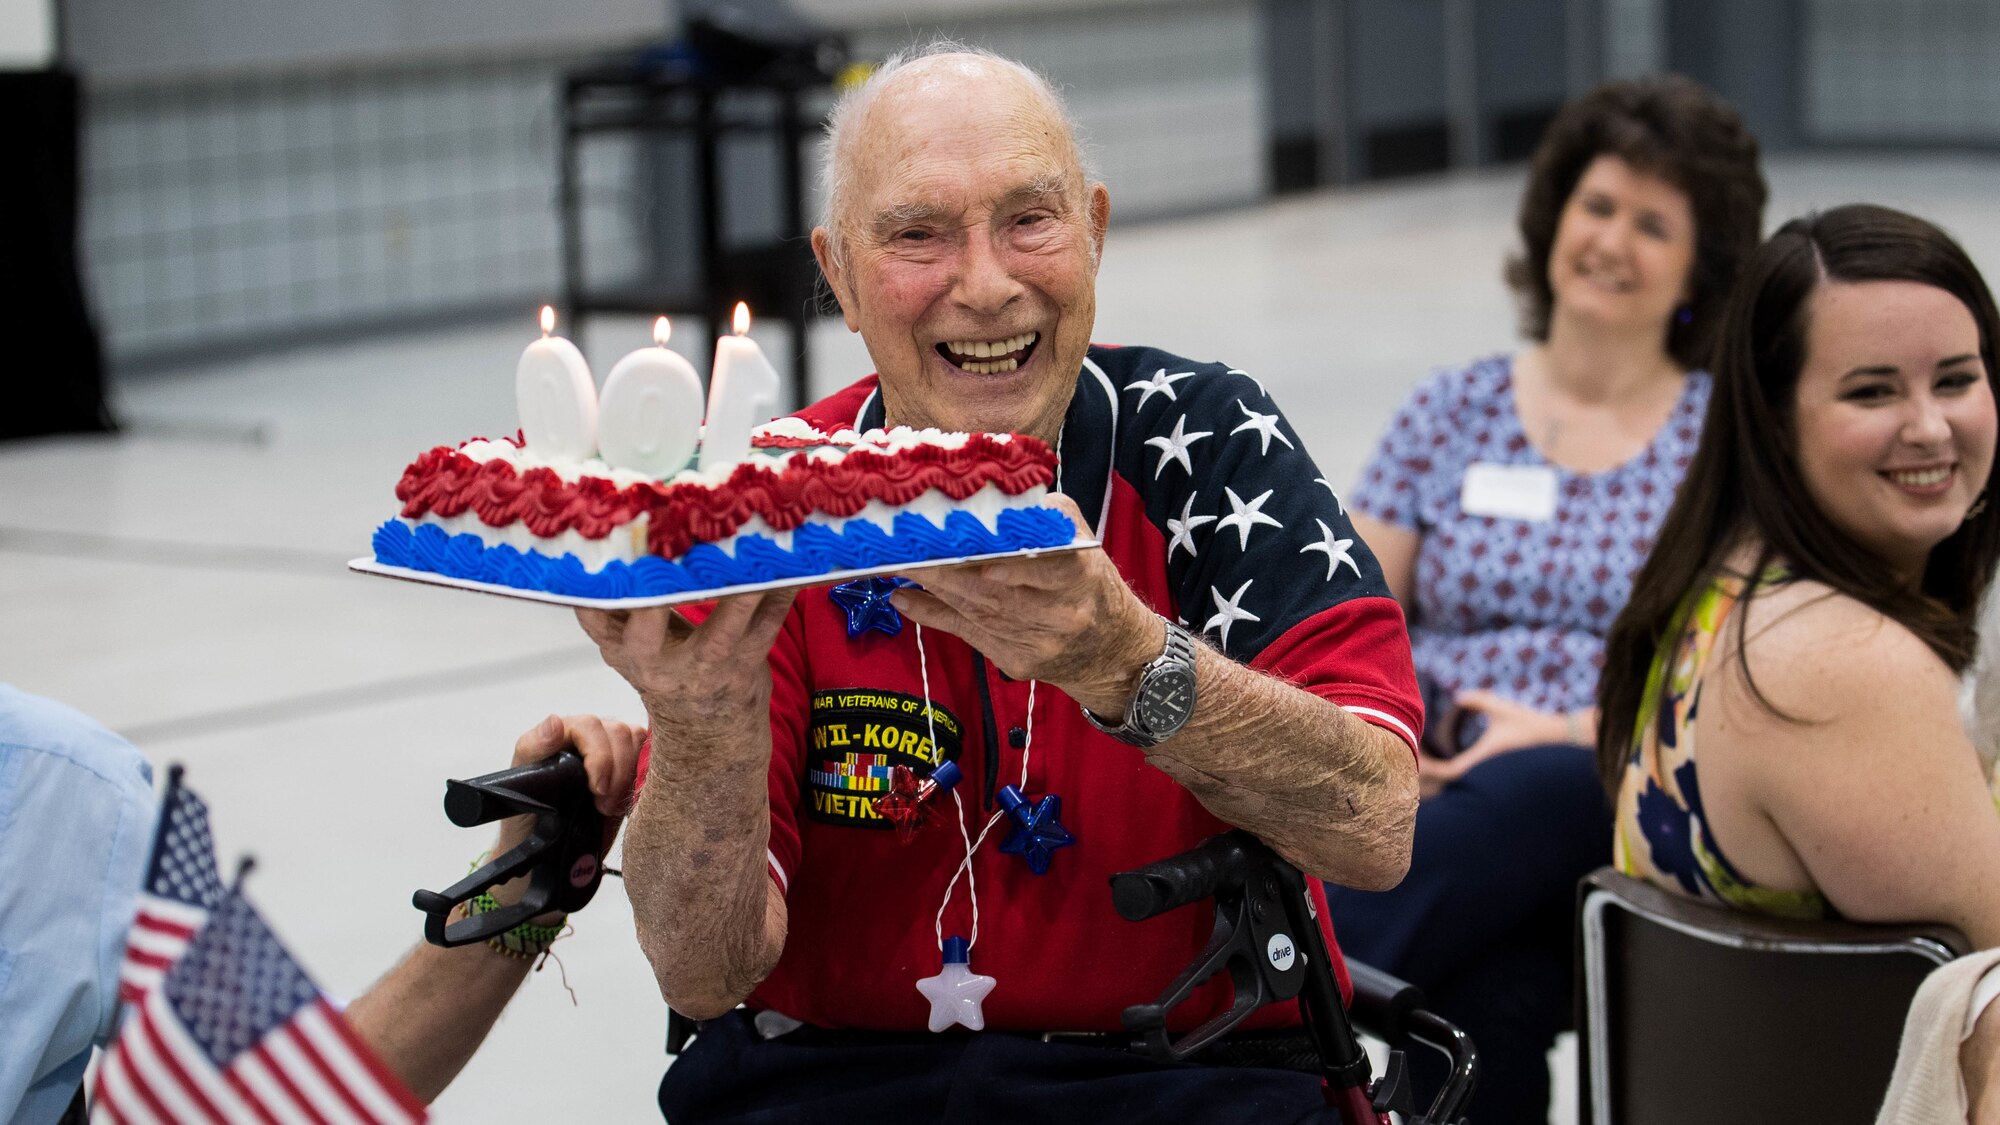 Retired Col. Steven L. dePyssler, 2nd Missions Support Group retiree affairs director, holds his birthday cake during his 100th birthday celebration at the Bossier City Civic Center, Bossier City, Louisiana, July 19, 2019. dePysssler was born July 21, 1919 in Chicago, Illinois. (U.S. Air Force photo by Airman Jacob B. Wrightsman)